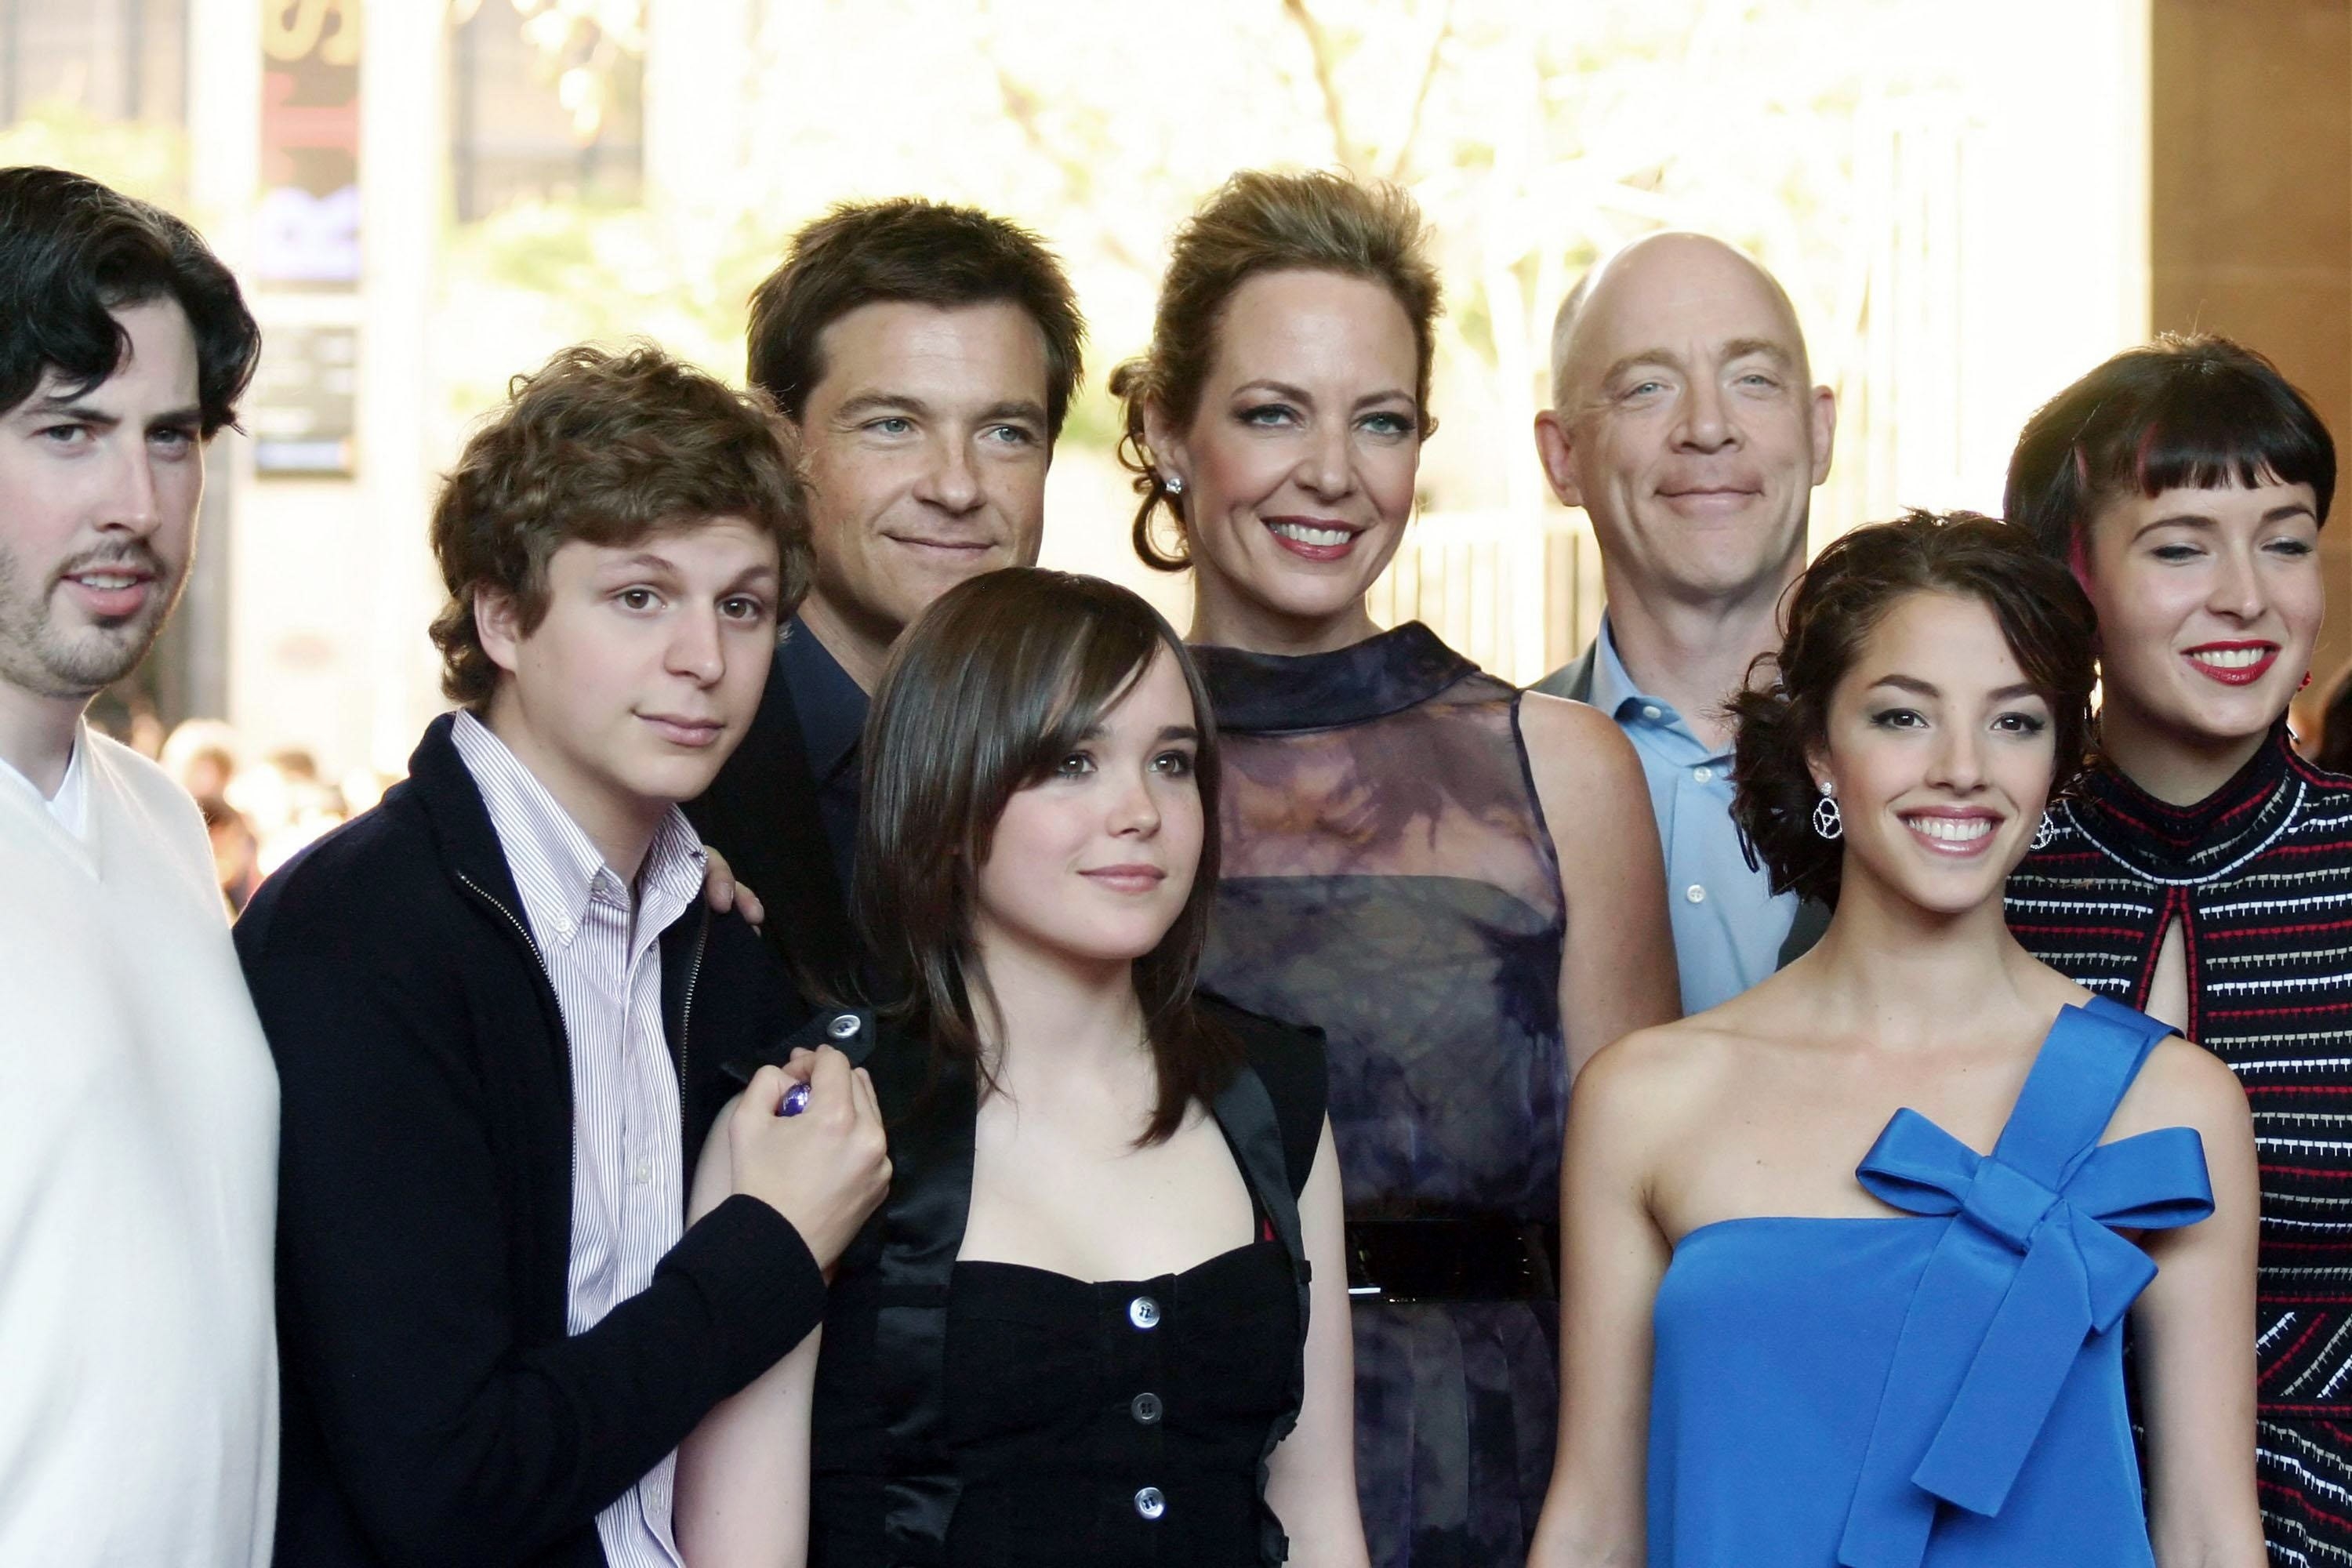 the cast taking a group photo